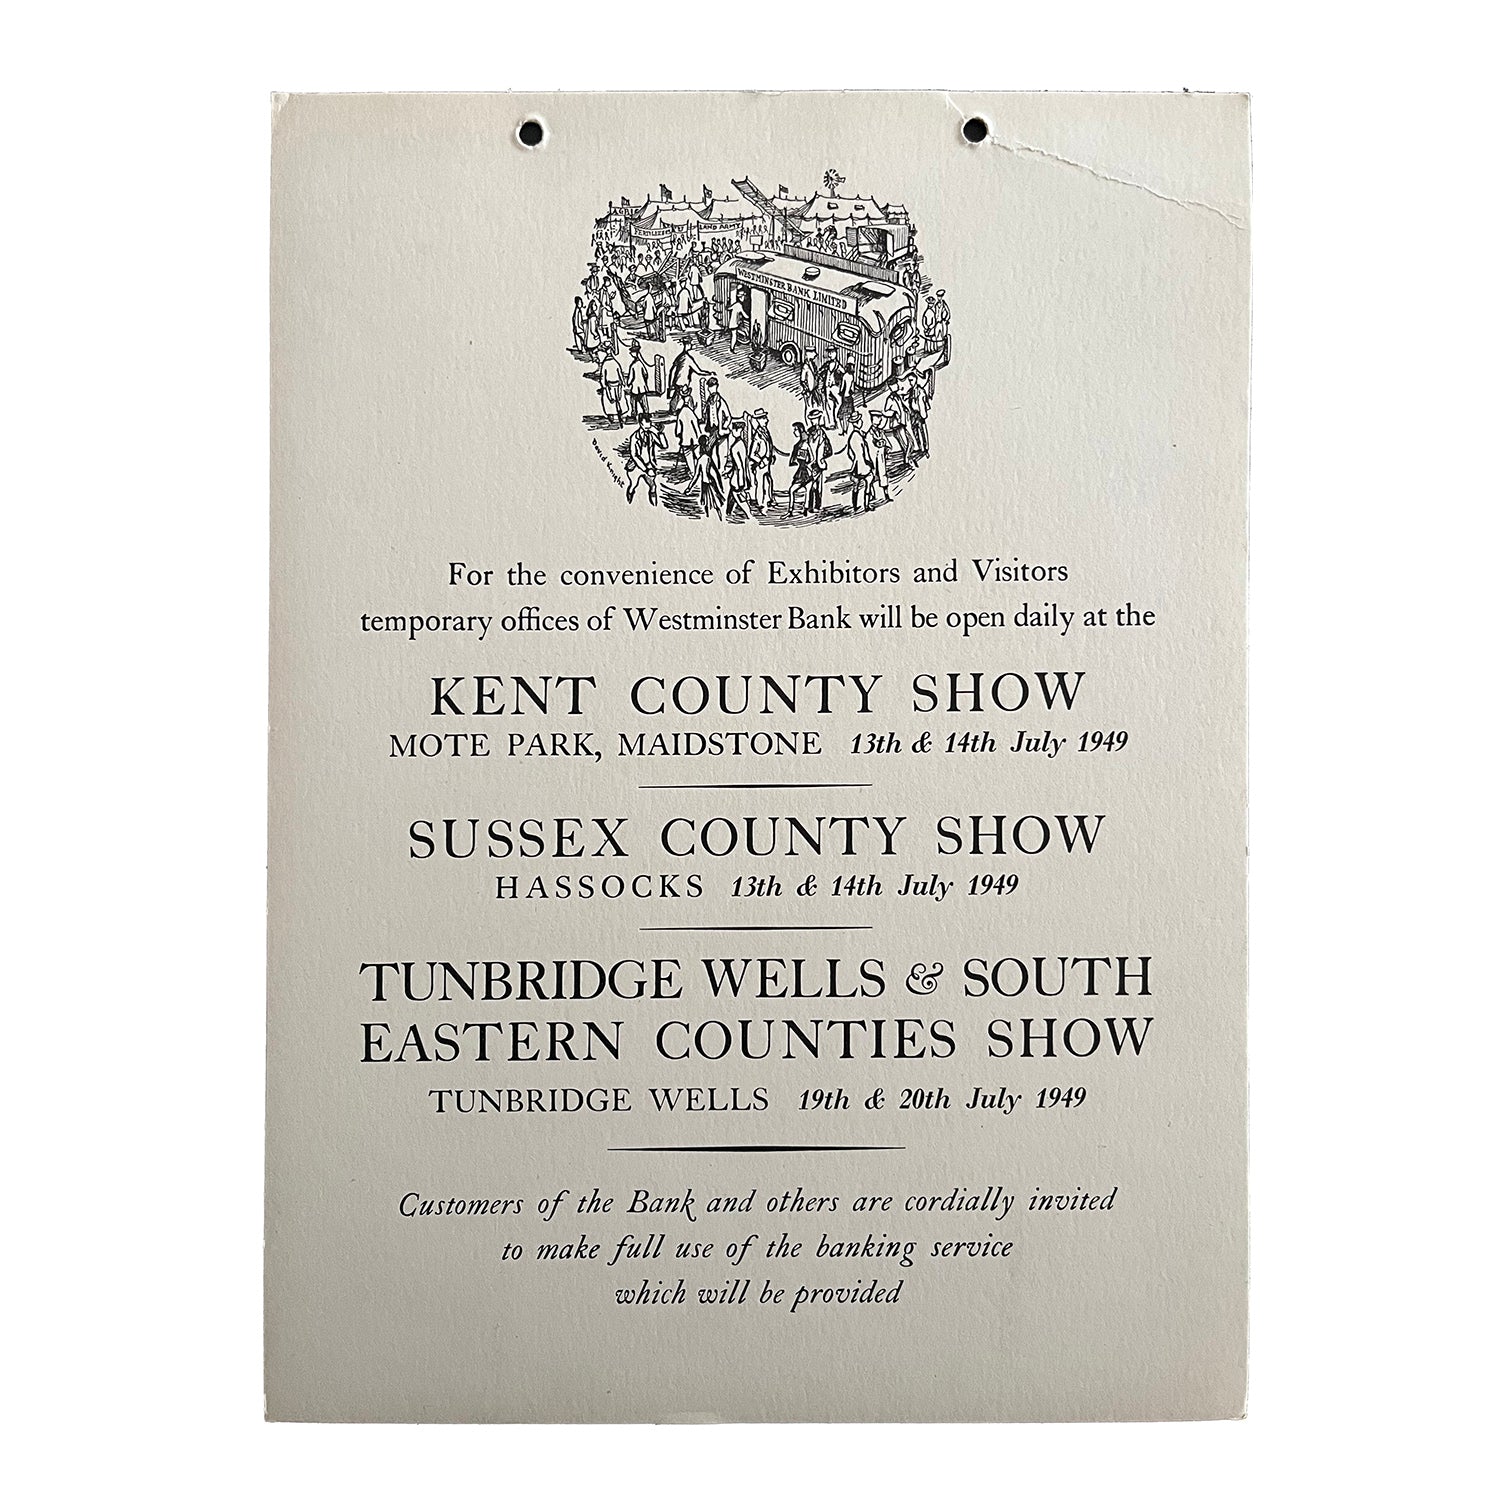 hanging card exhibitor notice published by the Westminster Bank for display at the Kent County Show, Sussex County Show, Tunbridge Wells & South Eastern Counties Show, 1949. Includes a charming illustration by Donald Knight of the Bank’s mobile trade stand in the midst of a busy country fair